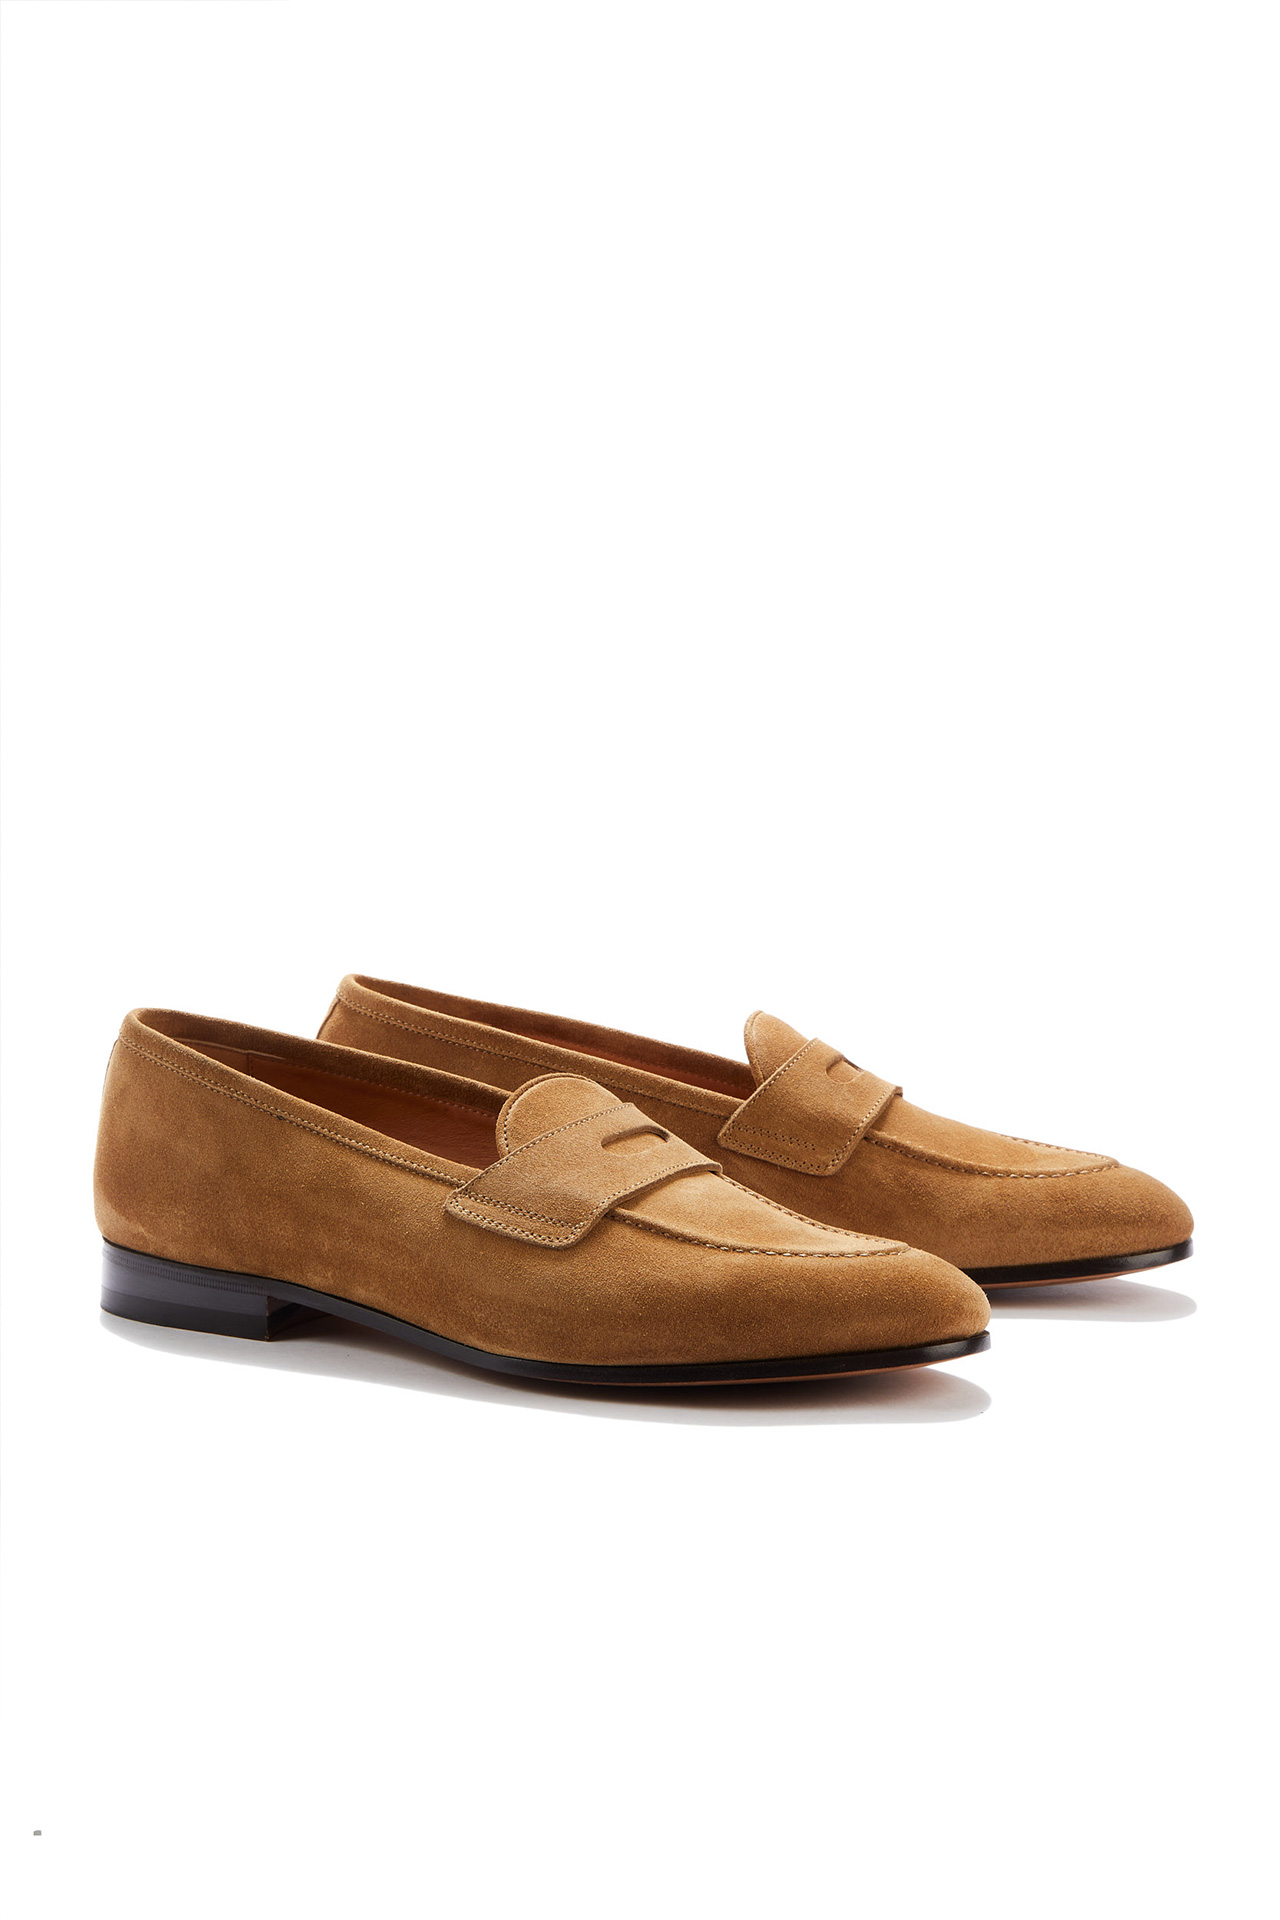 Lawrence Light Brown Penny Loafers - Barbanera